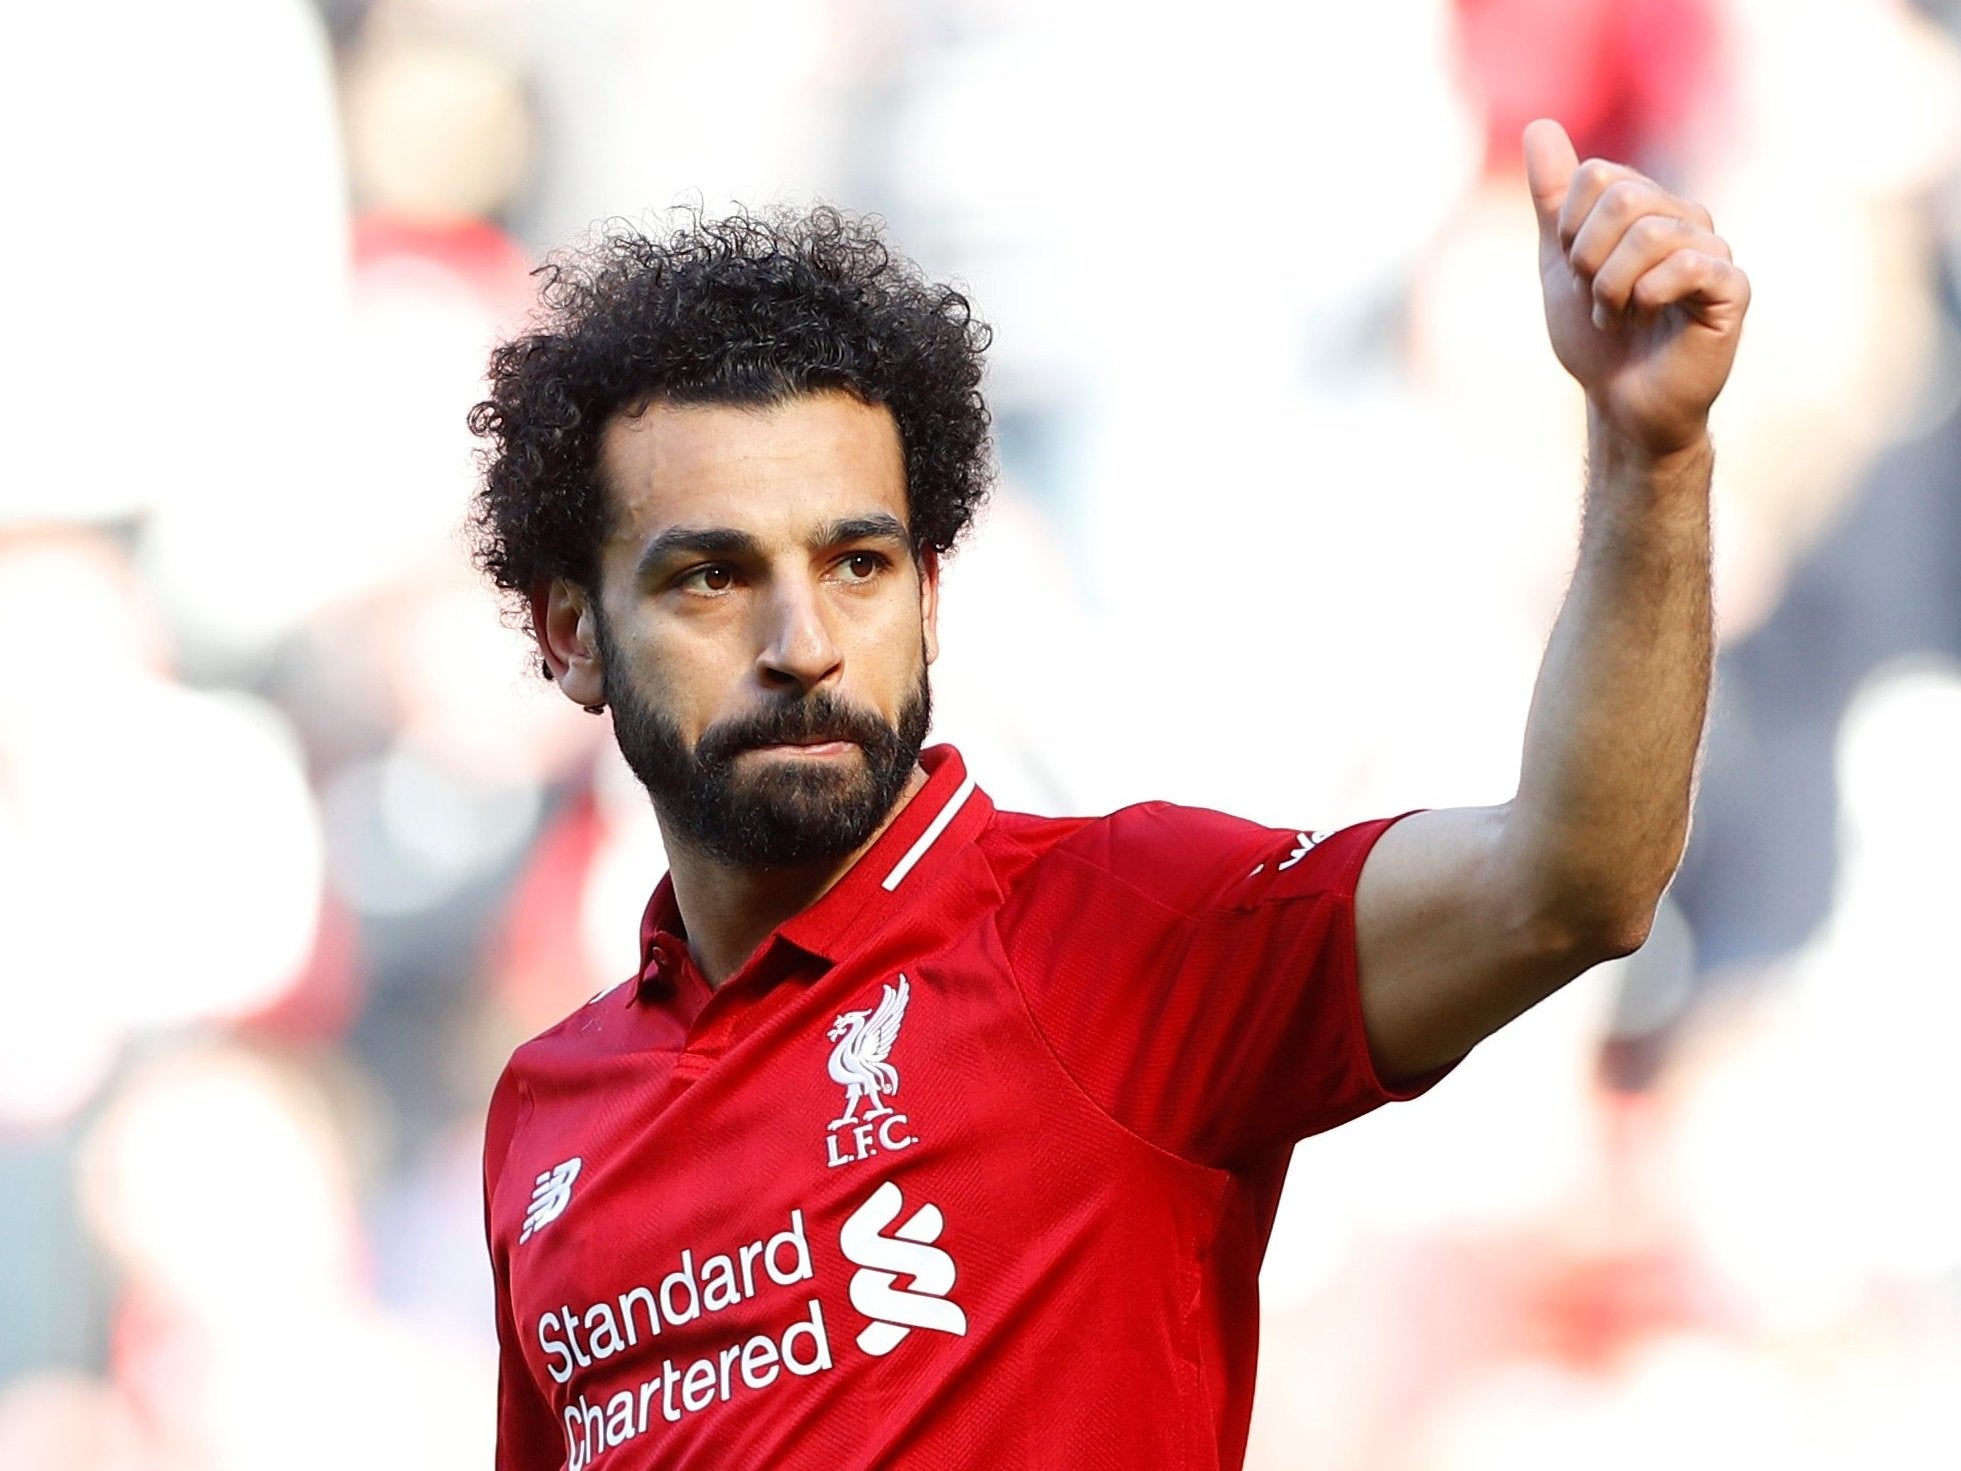 Mohamed Salah has rallied Liverpool fans